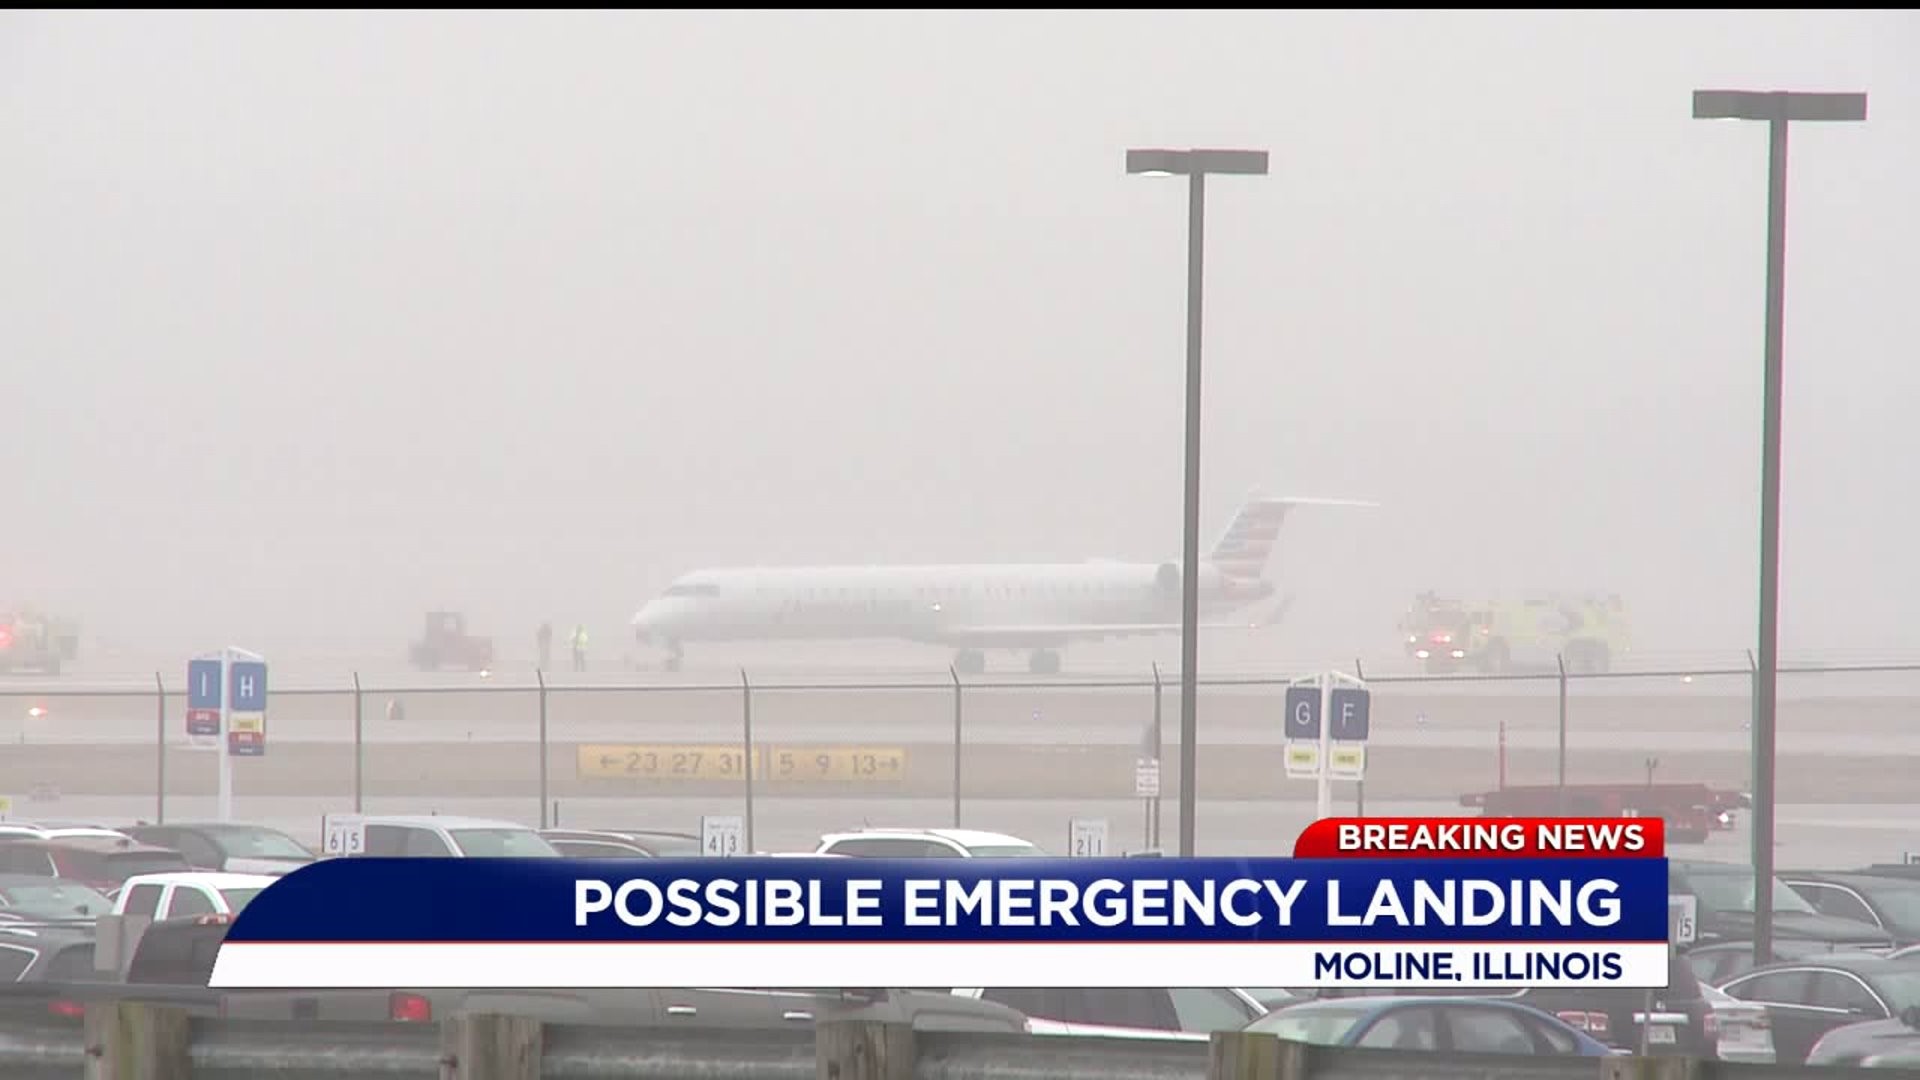 Responders called to QC Airport for possible emergency landing